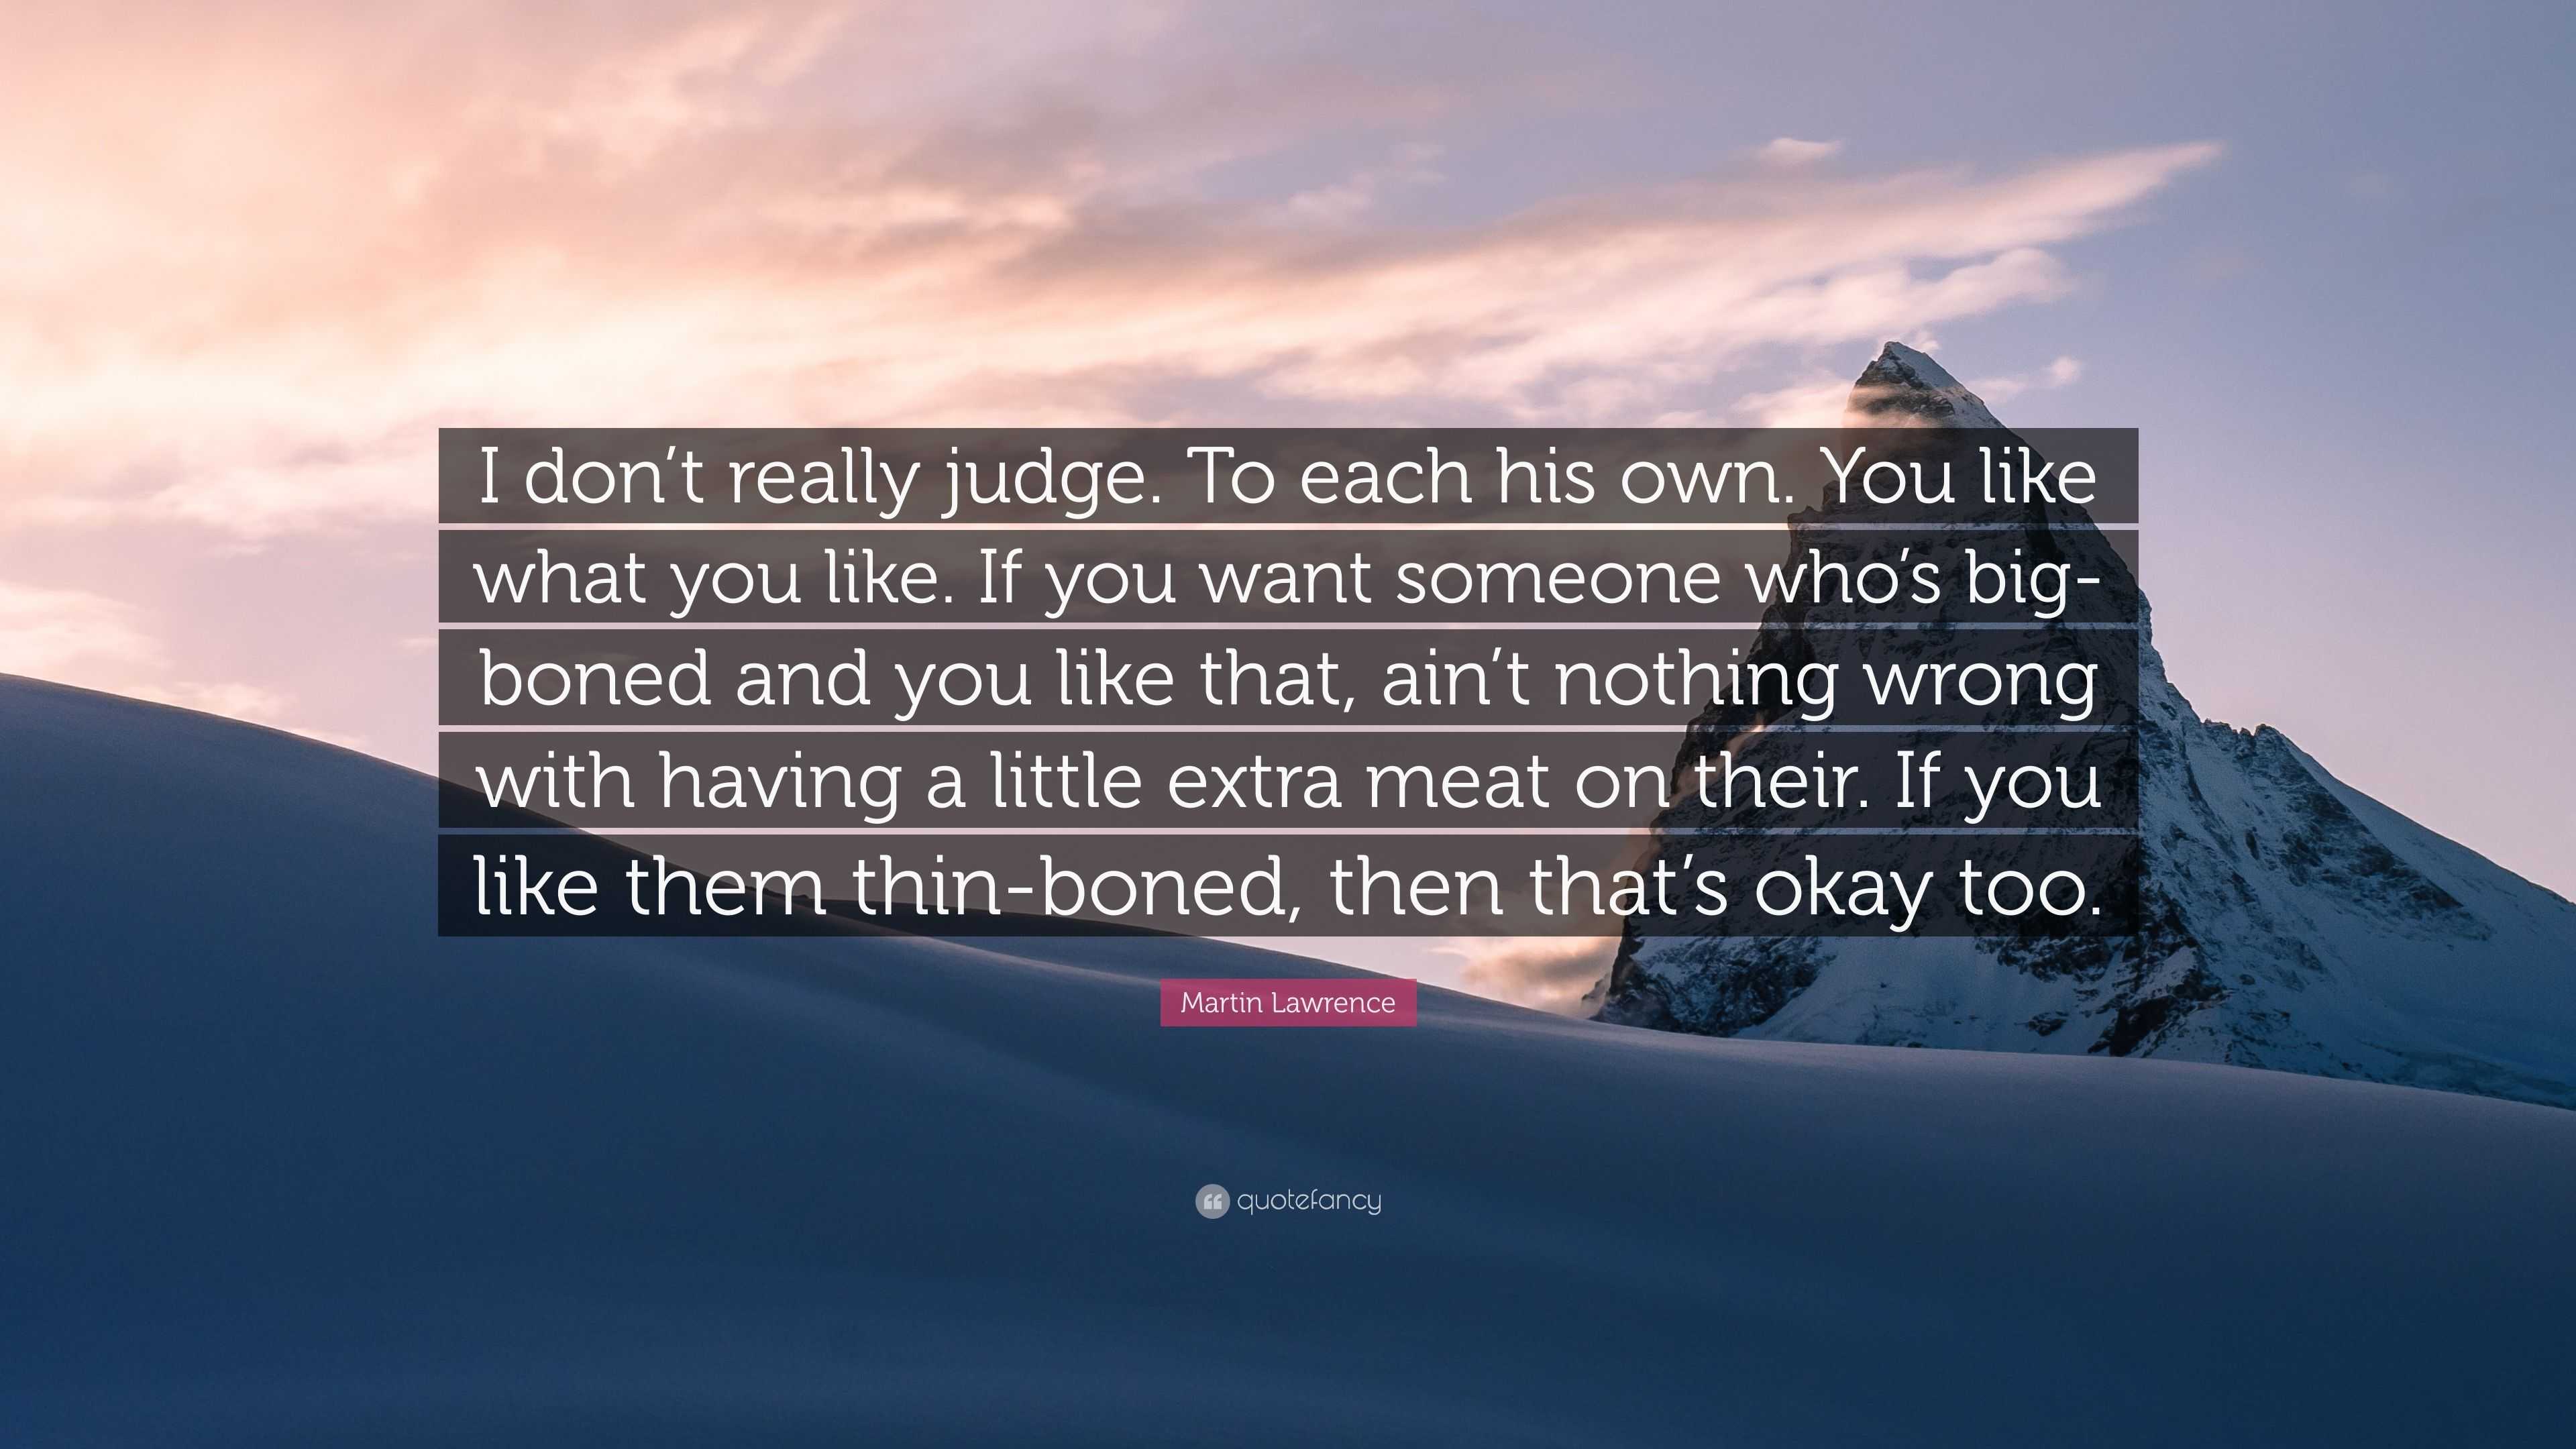 Martin Lawrence Quote: “I don't really judge. To each his own. You